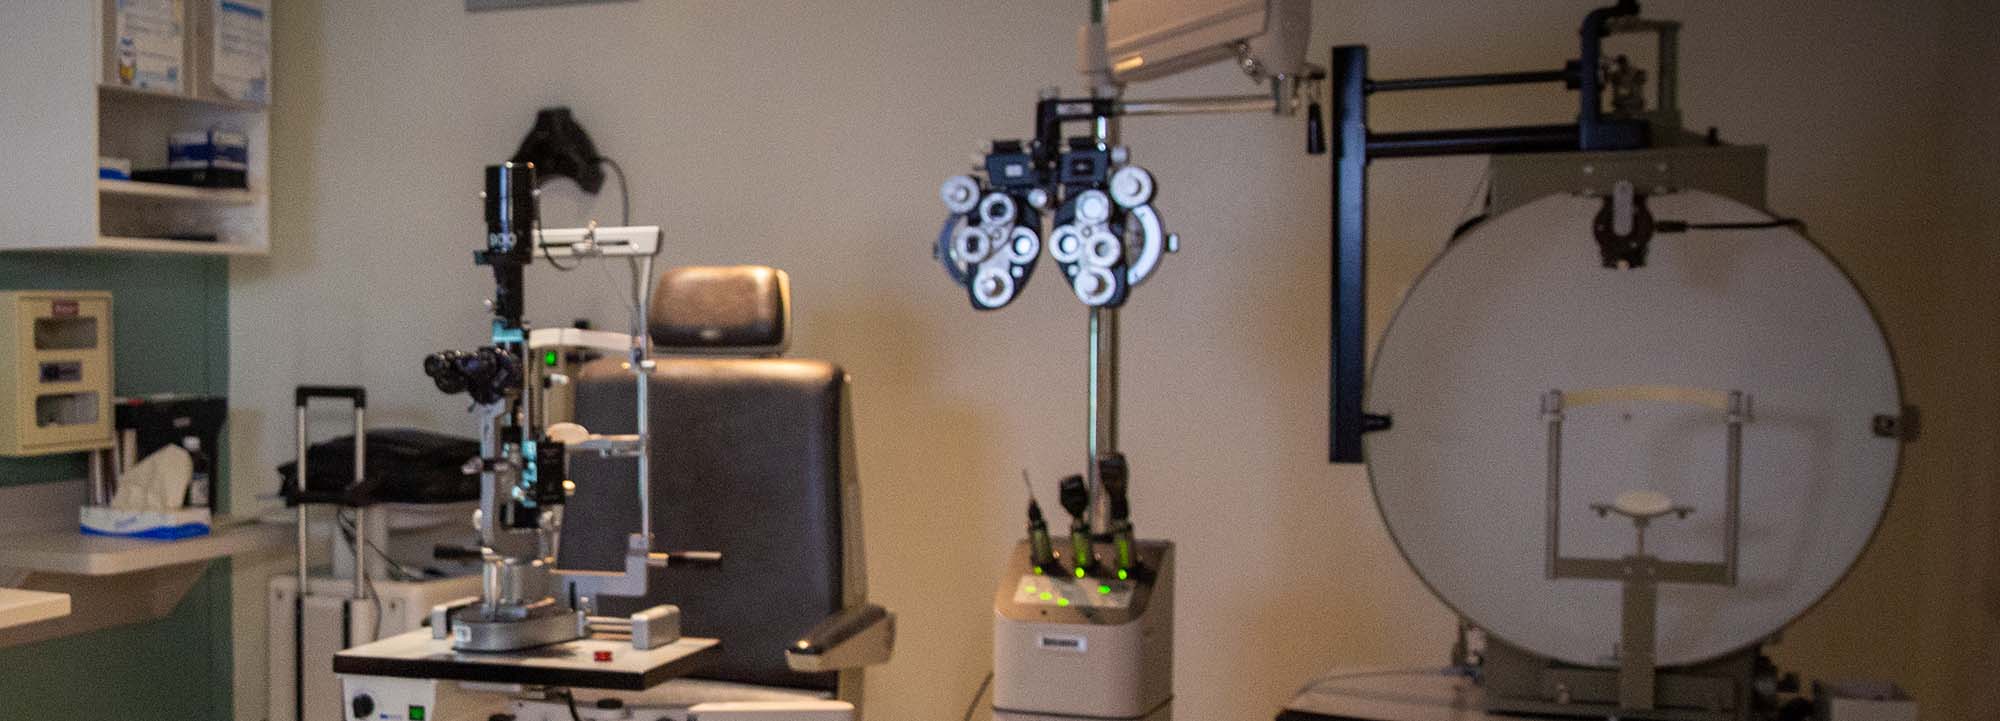 Ophthalmology gear in an eye clinic